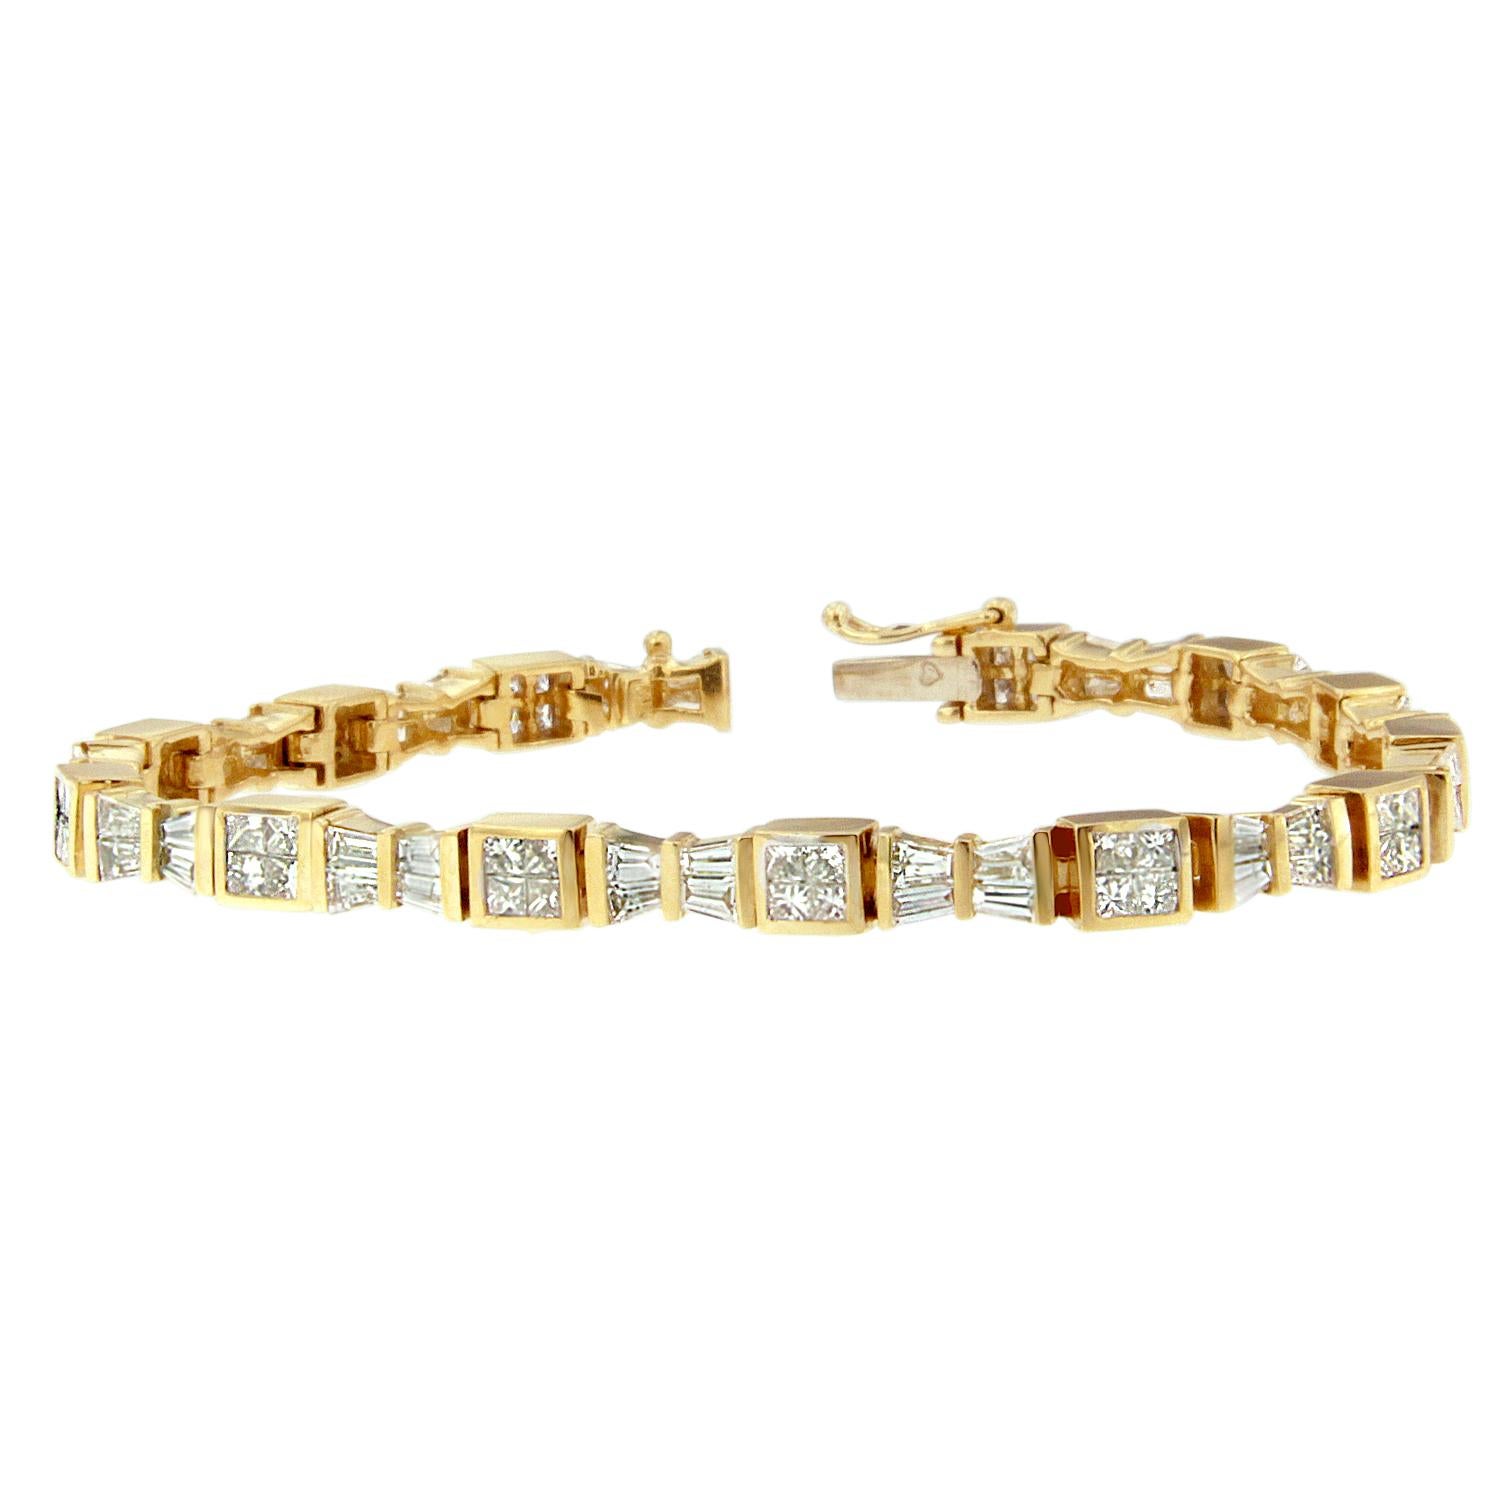 This diamond studded bracelet is shaping up to be her new favorite! Set in 14 karat yellow gold, and lined with chic cube and sparkly bow tie links, it's a dazzling design that's dramatically different. Product features:
Diamond Type: Natural White